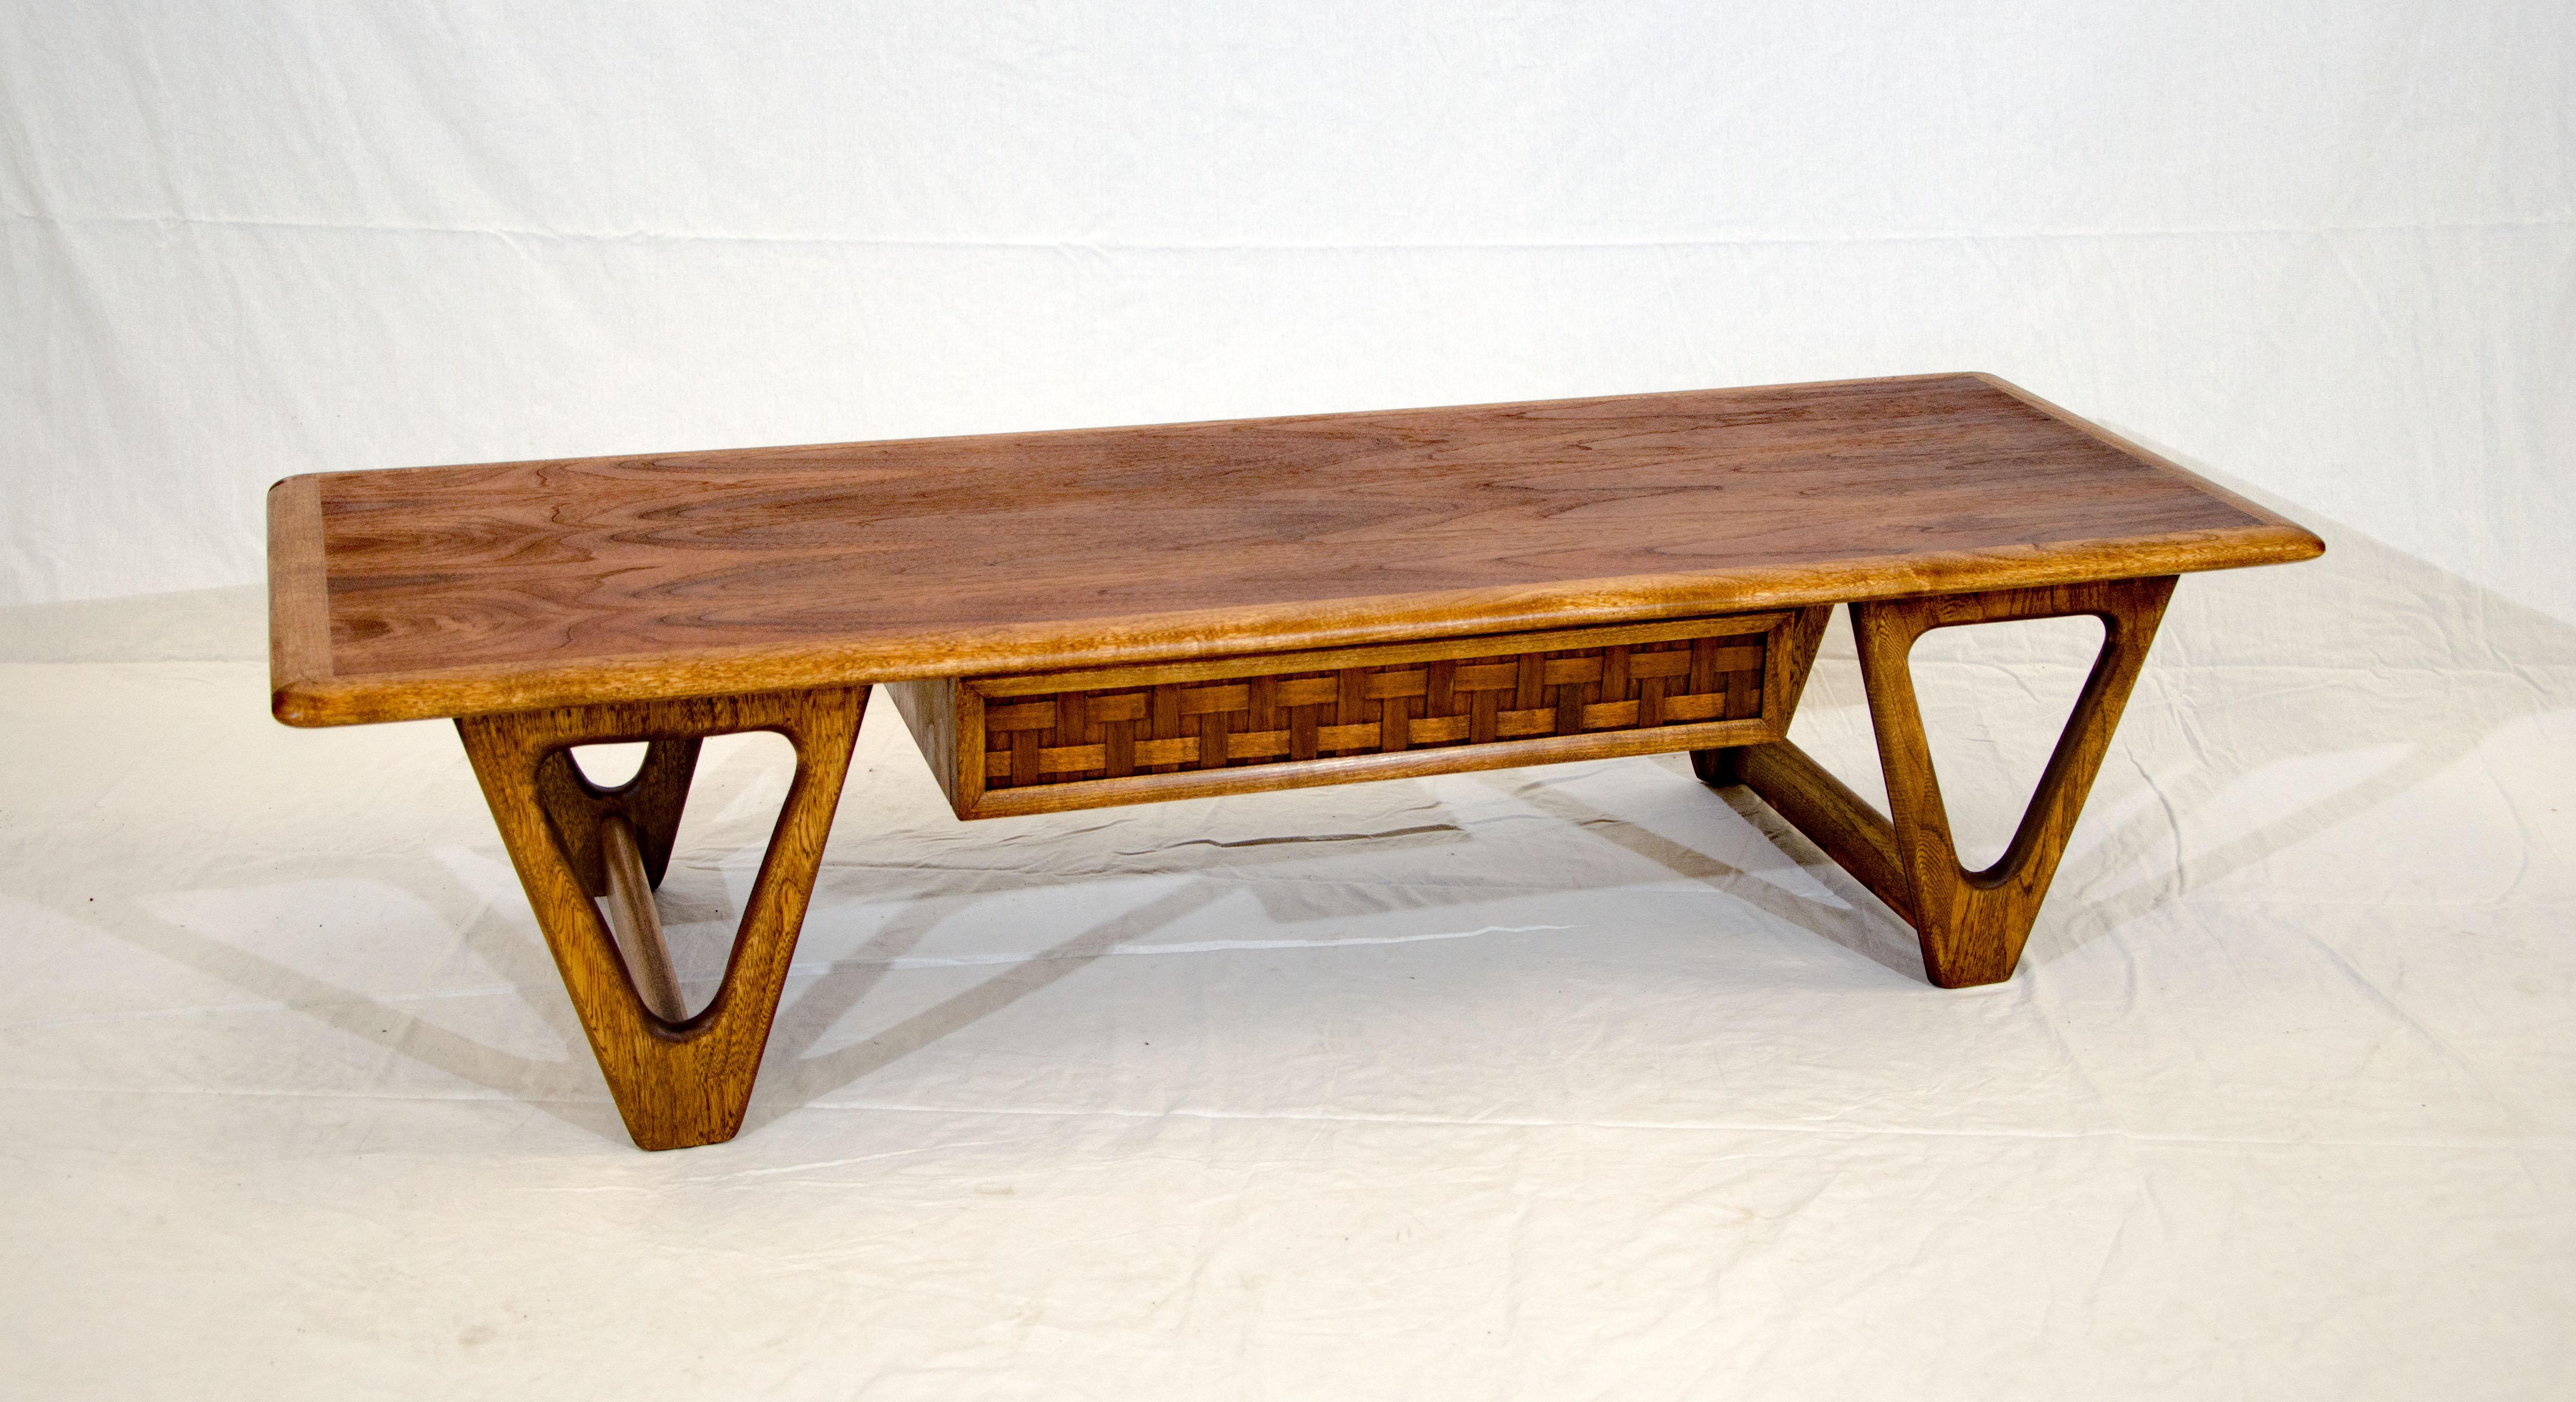 Midcentury rectangular walnut coffee table accented by an ash border and one drawer with a lattice Front Design. The base design consists of four 